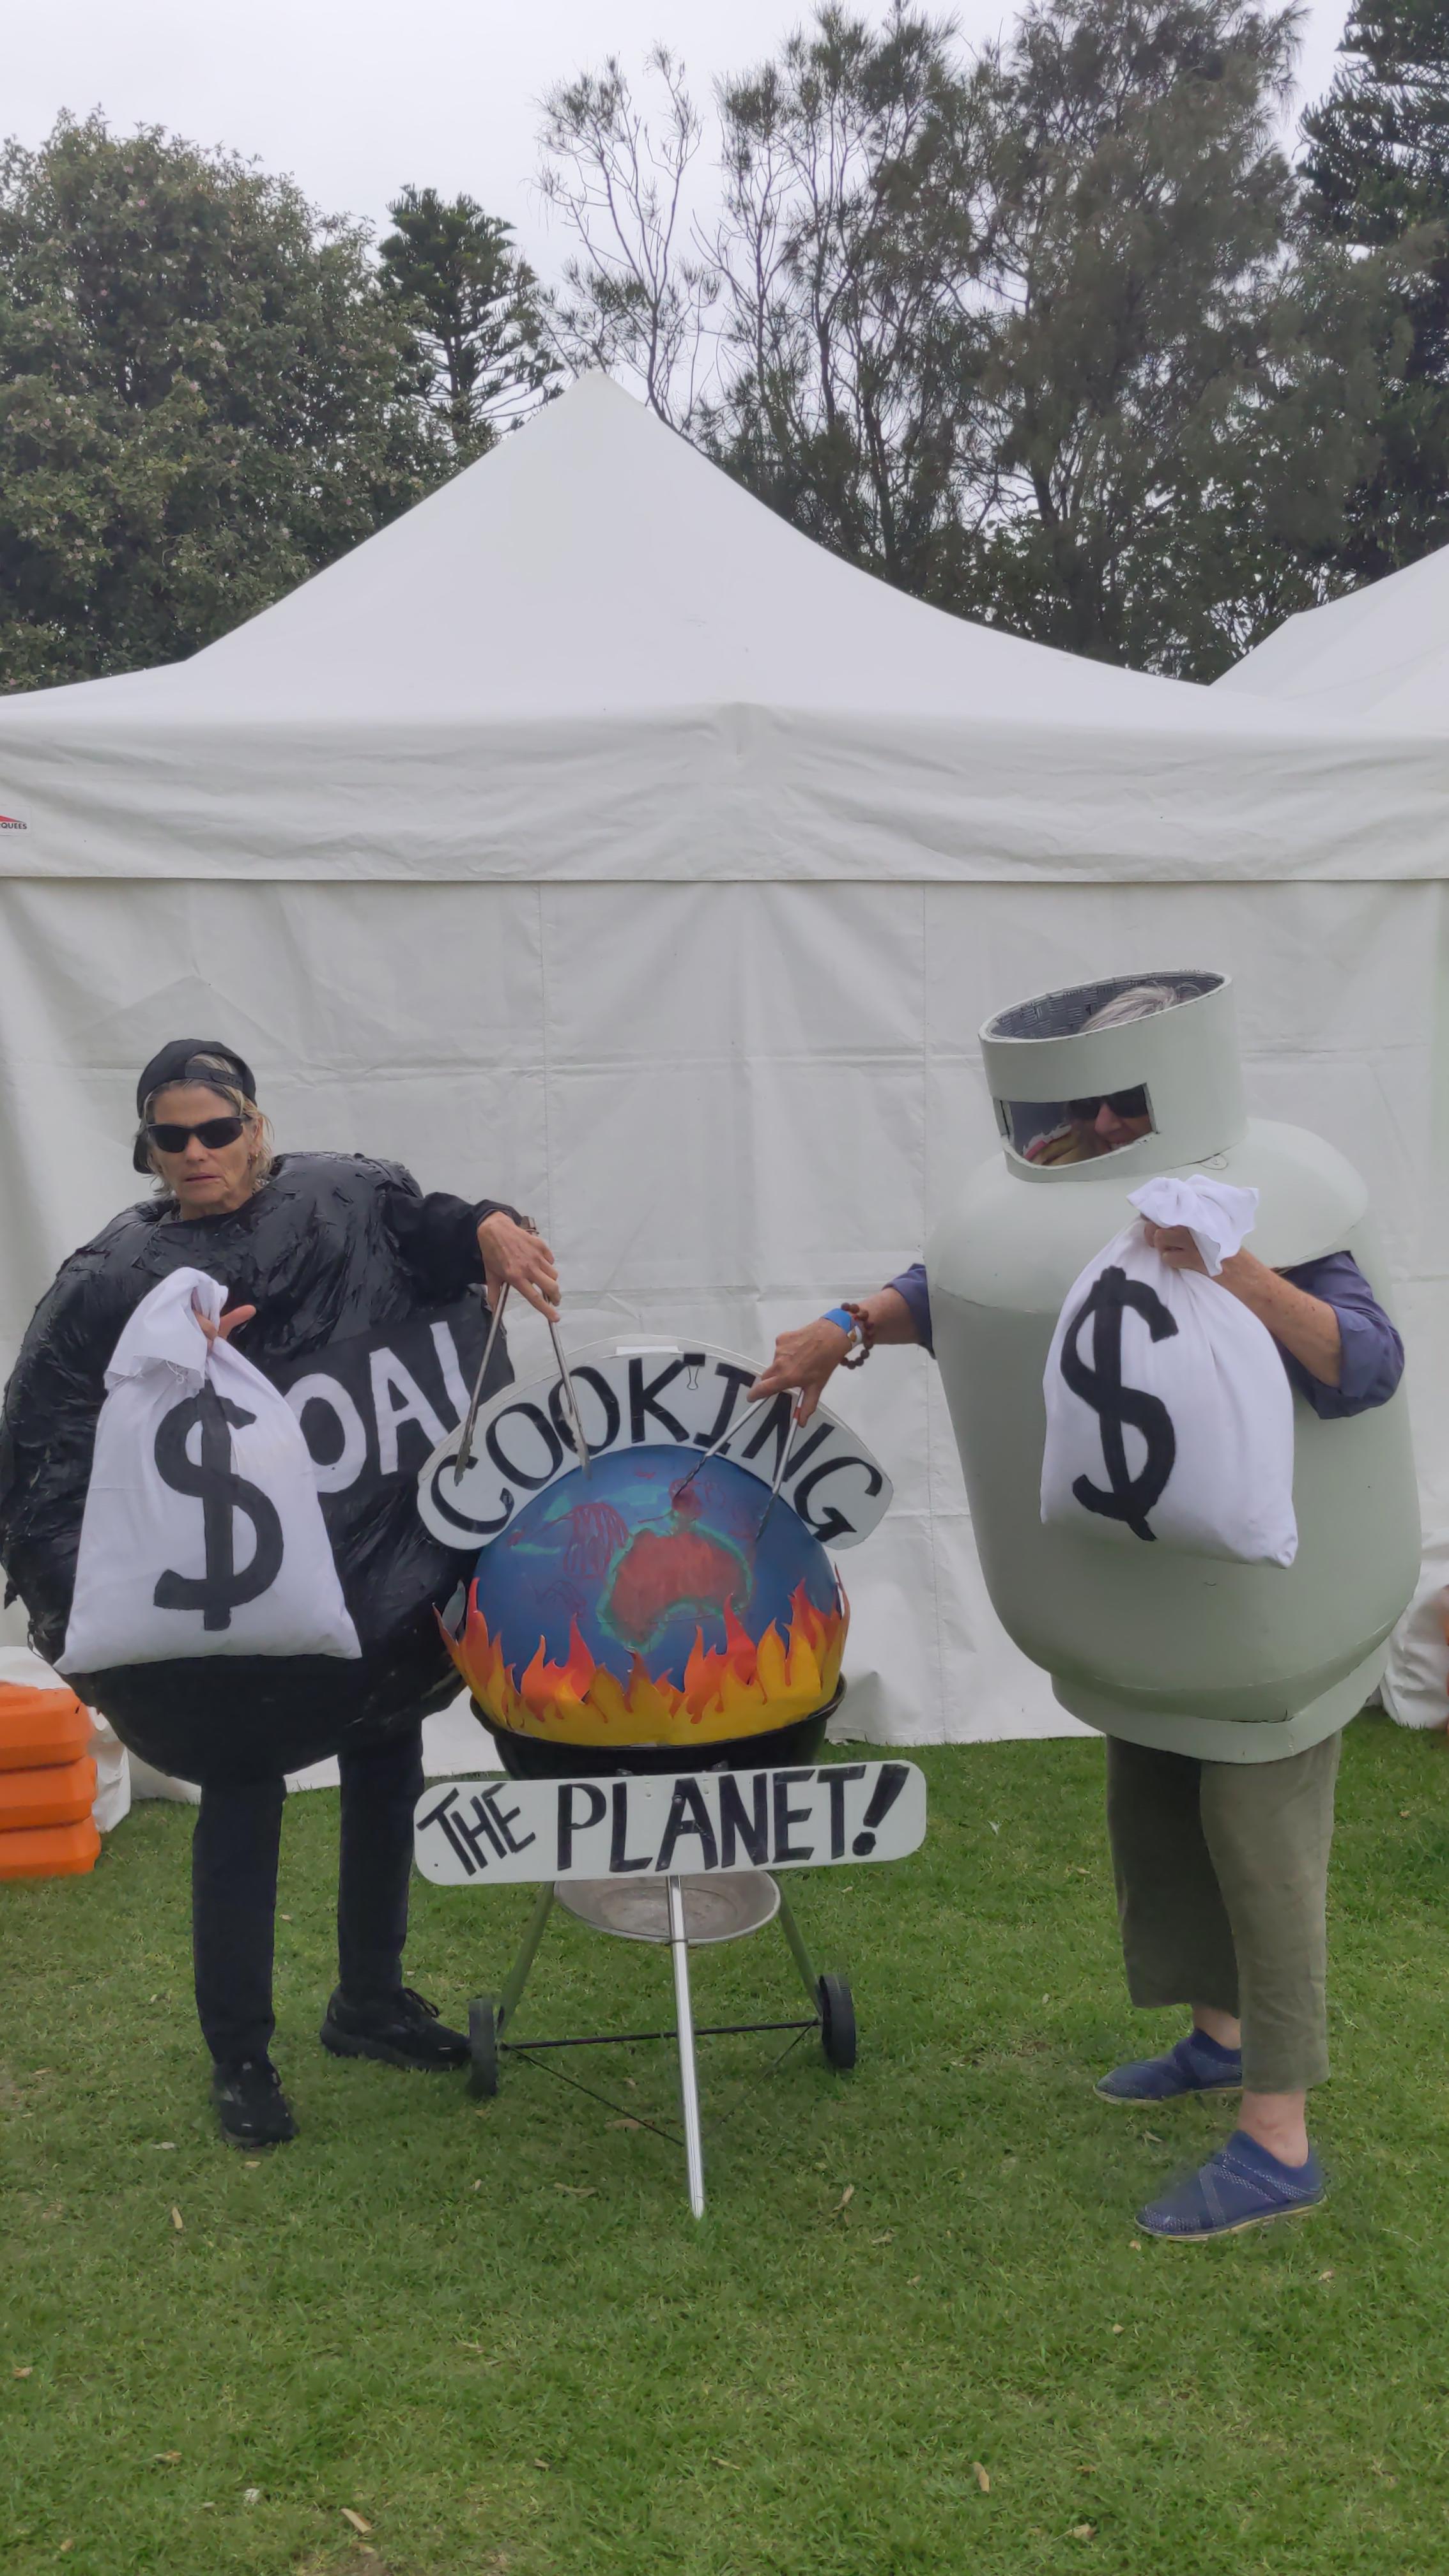 Two climate activists - one dressed as a lump of coal and one as a gas canister - cook an Earth on a BBQ with a sign that reads 'Cooking the planet!'